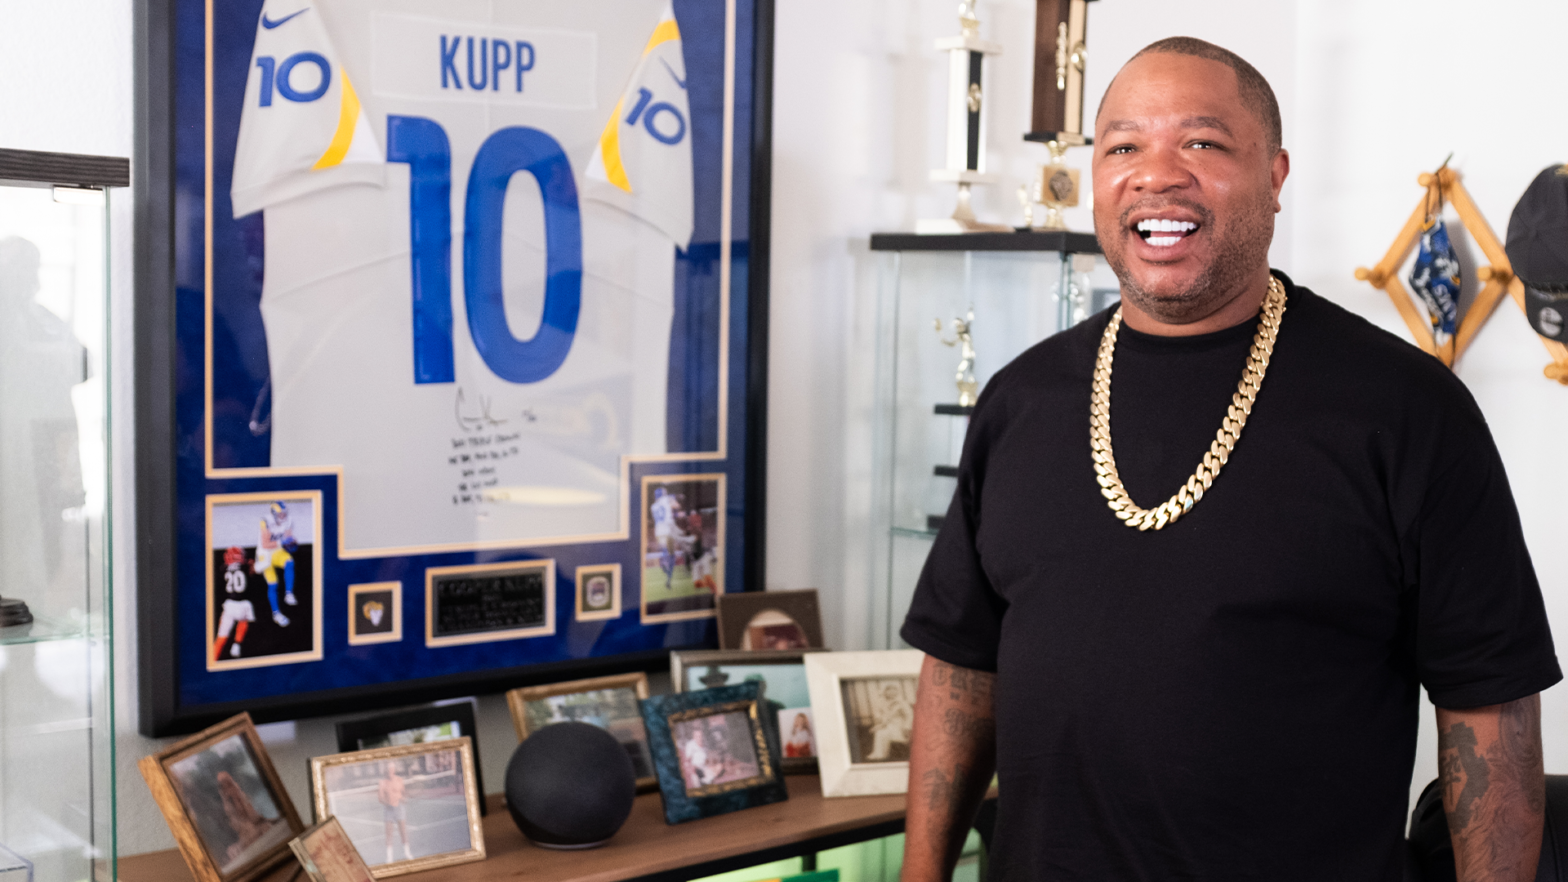 Exclusive: Xzibit Gets Back To The Basics Of The Makeover Genre, But This Time He's 'Tricking Out' With Amazon's Alexa